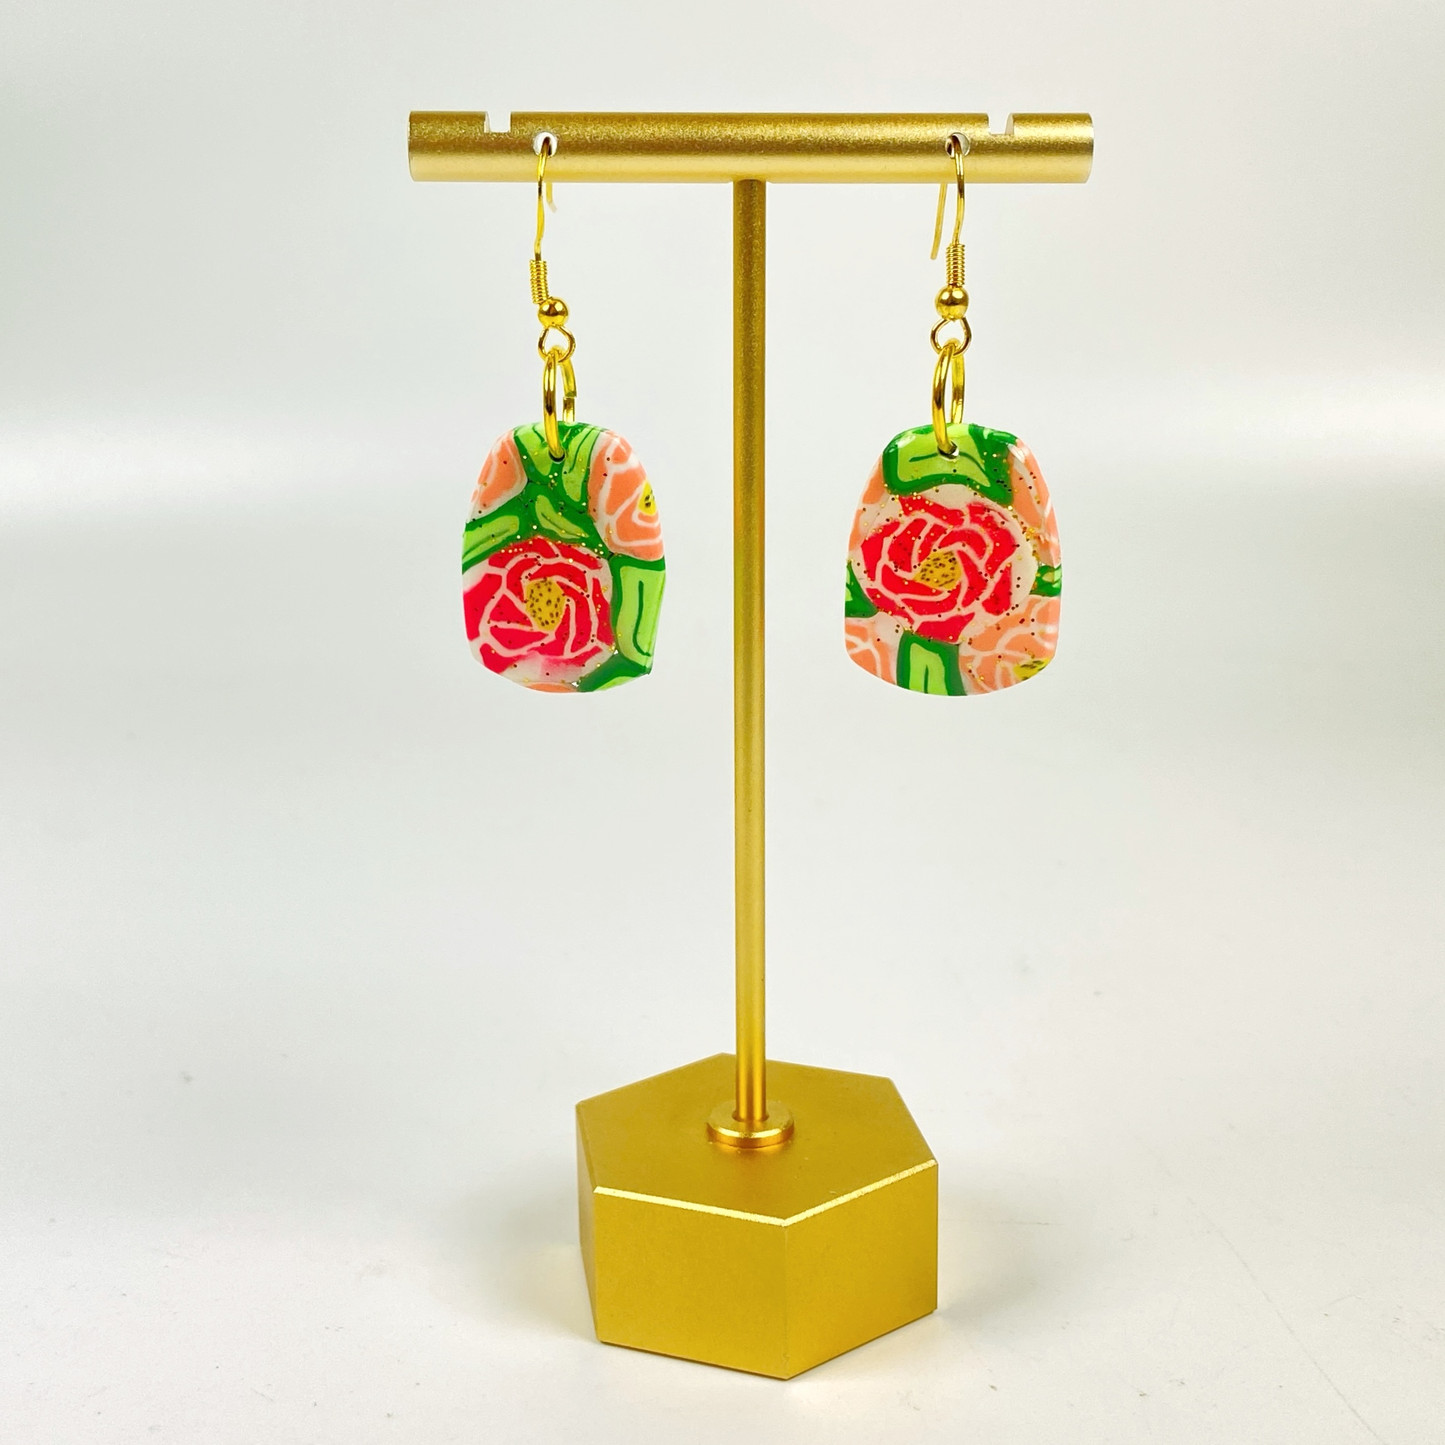 The Roses Handmade Polymer Clay Dangle Earrings on a brass earring display stand